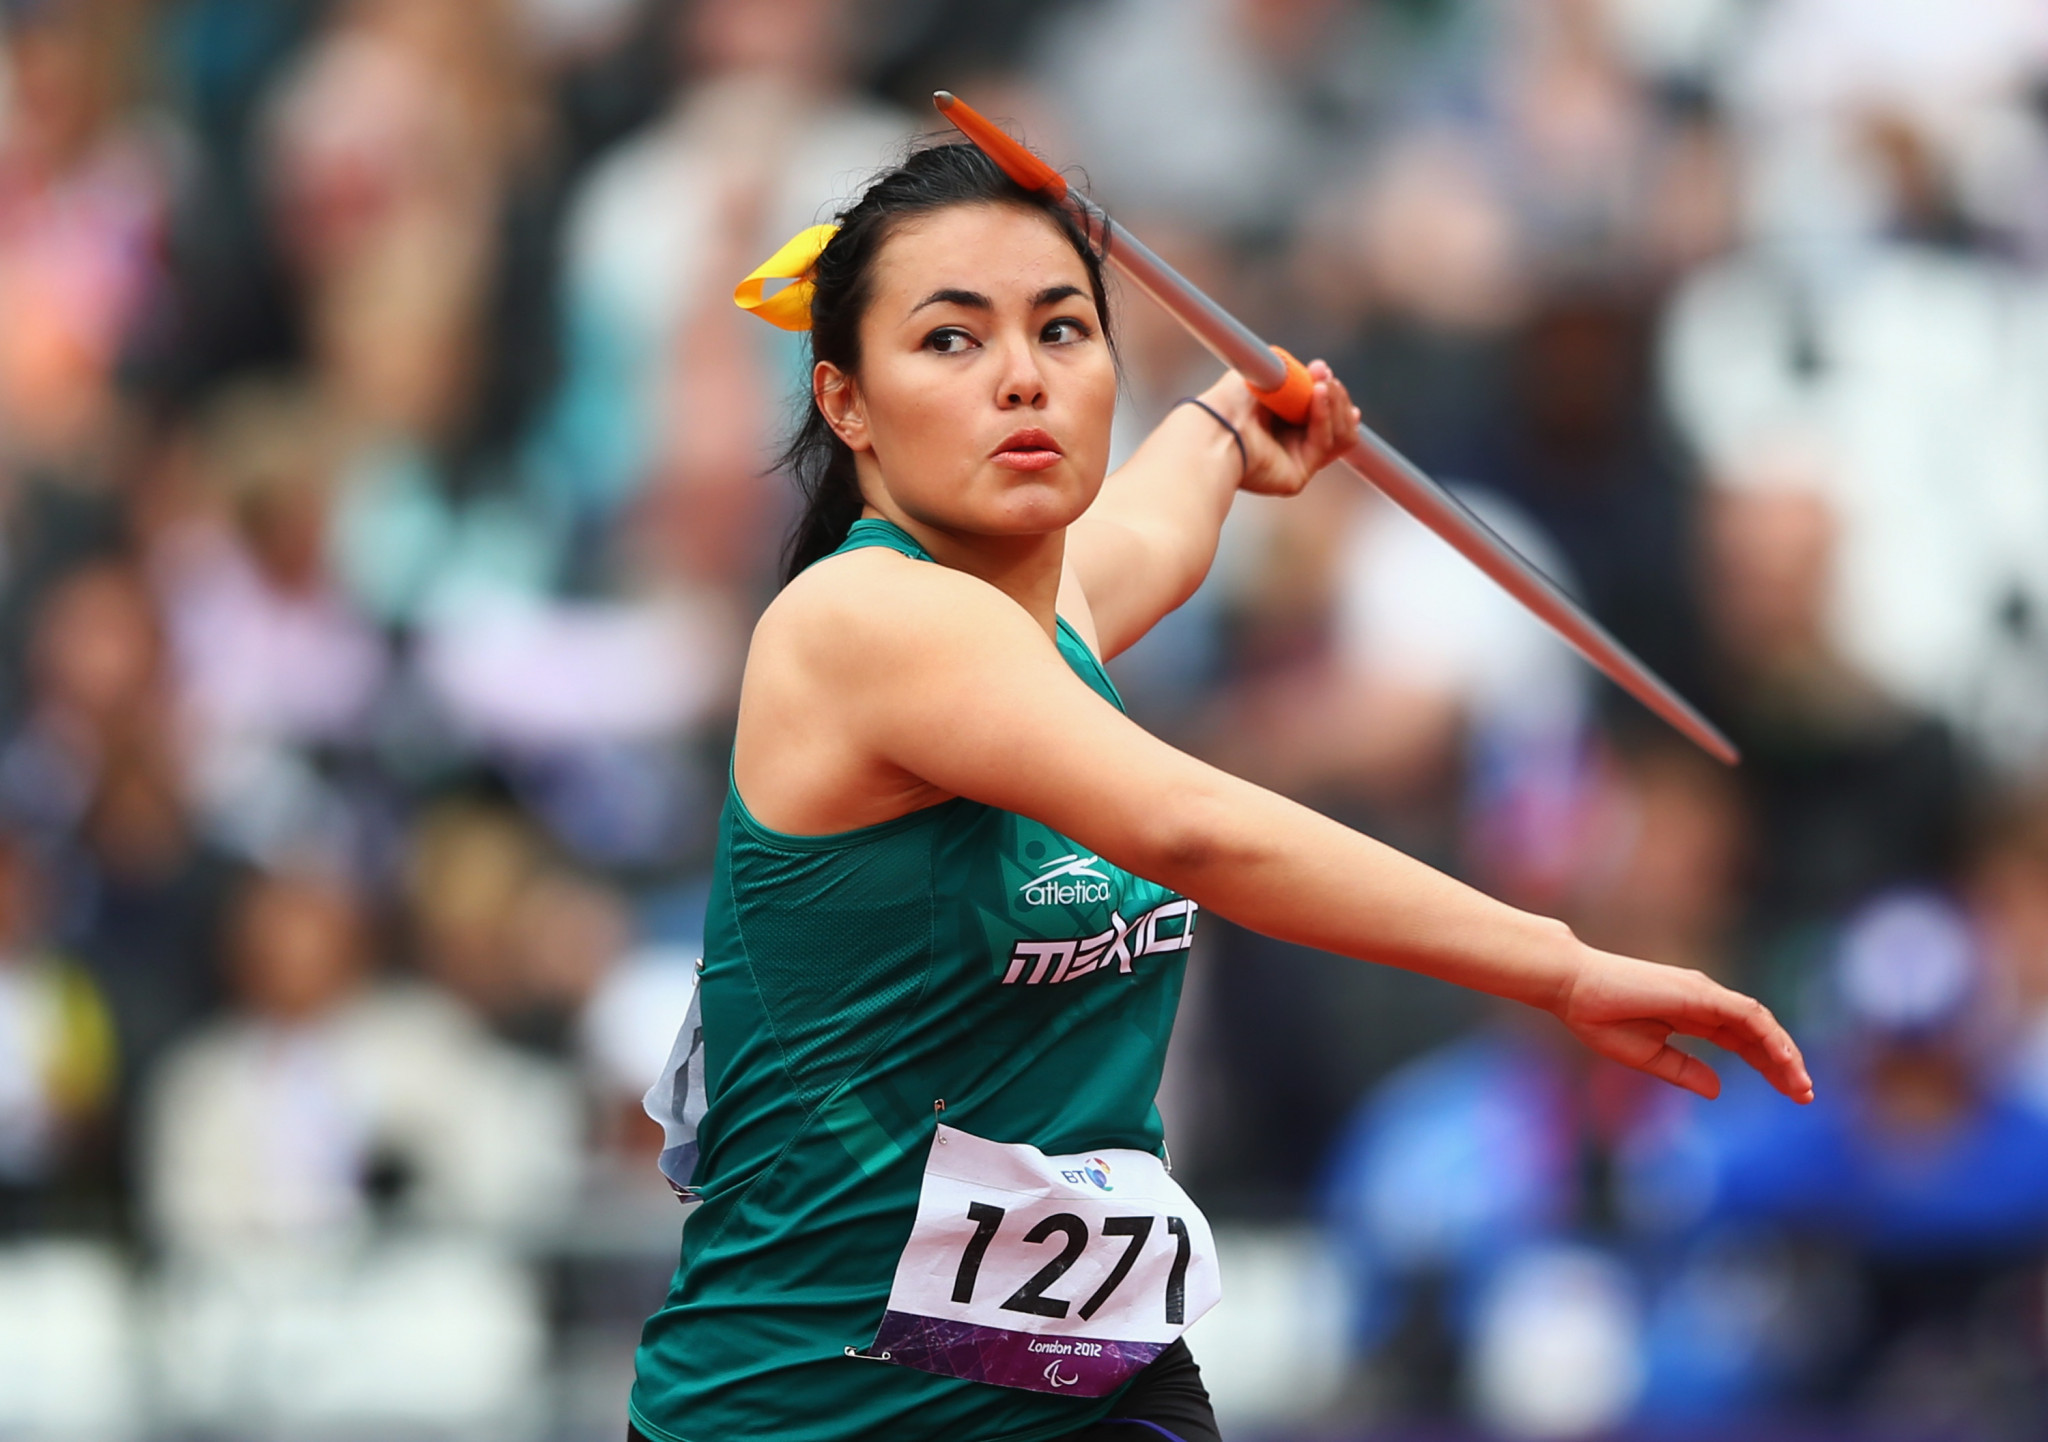 Mexican shot putter named Americas Paralympic Committee athlete of the month for February 